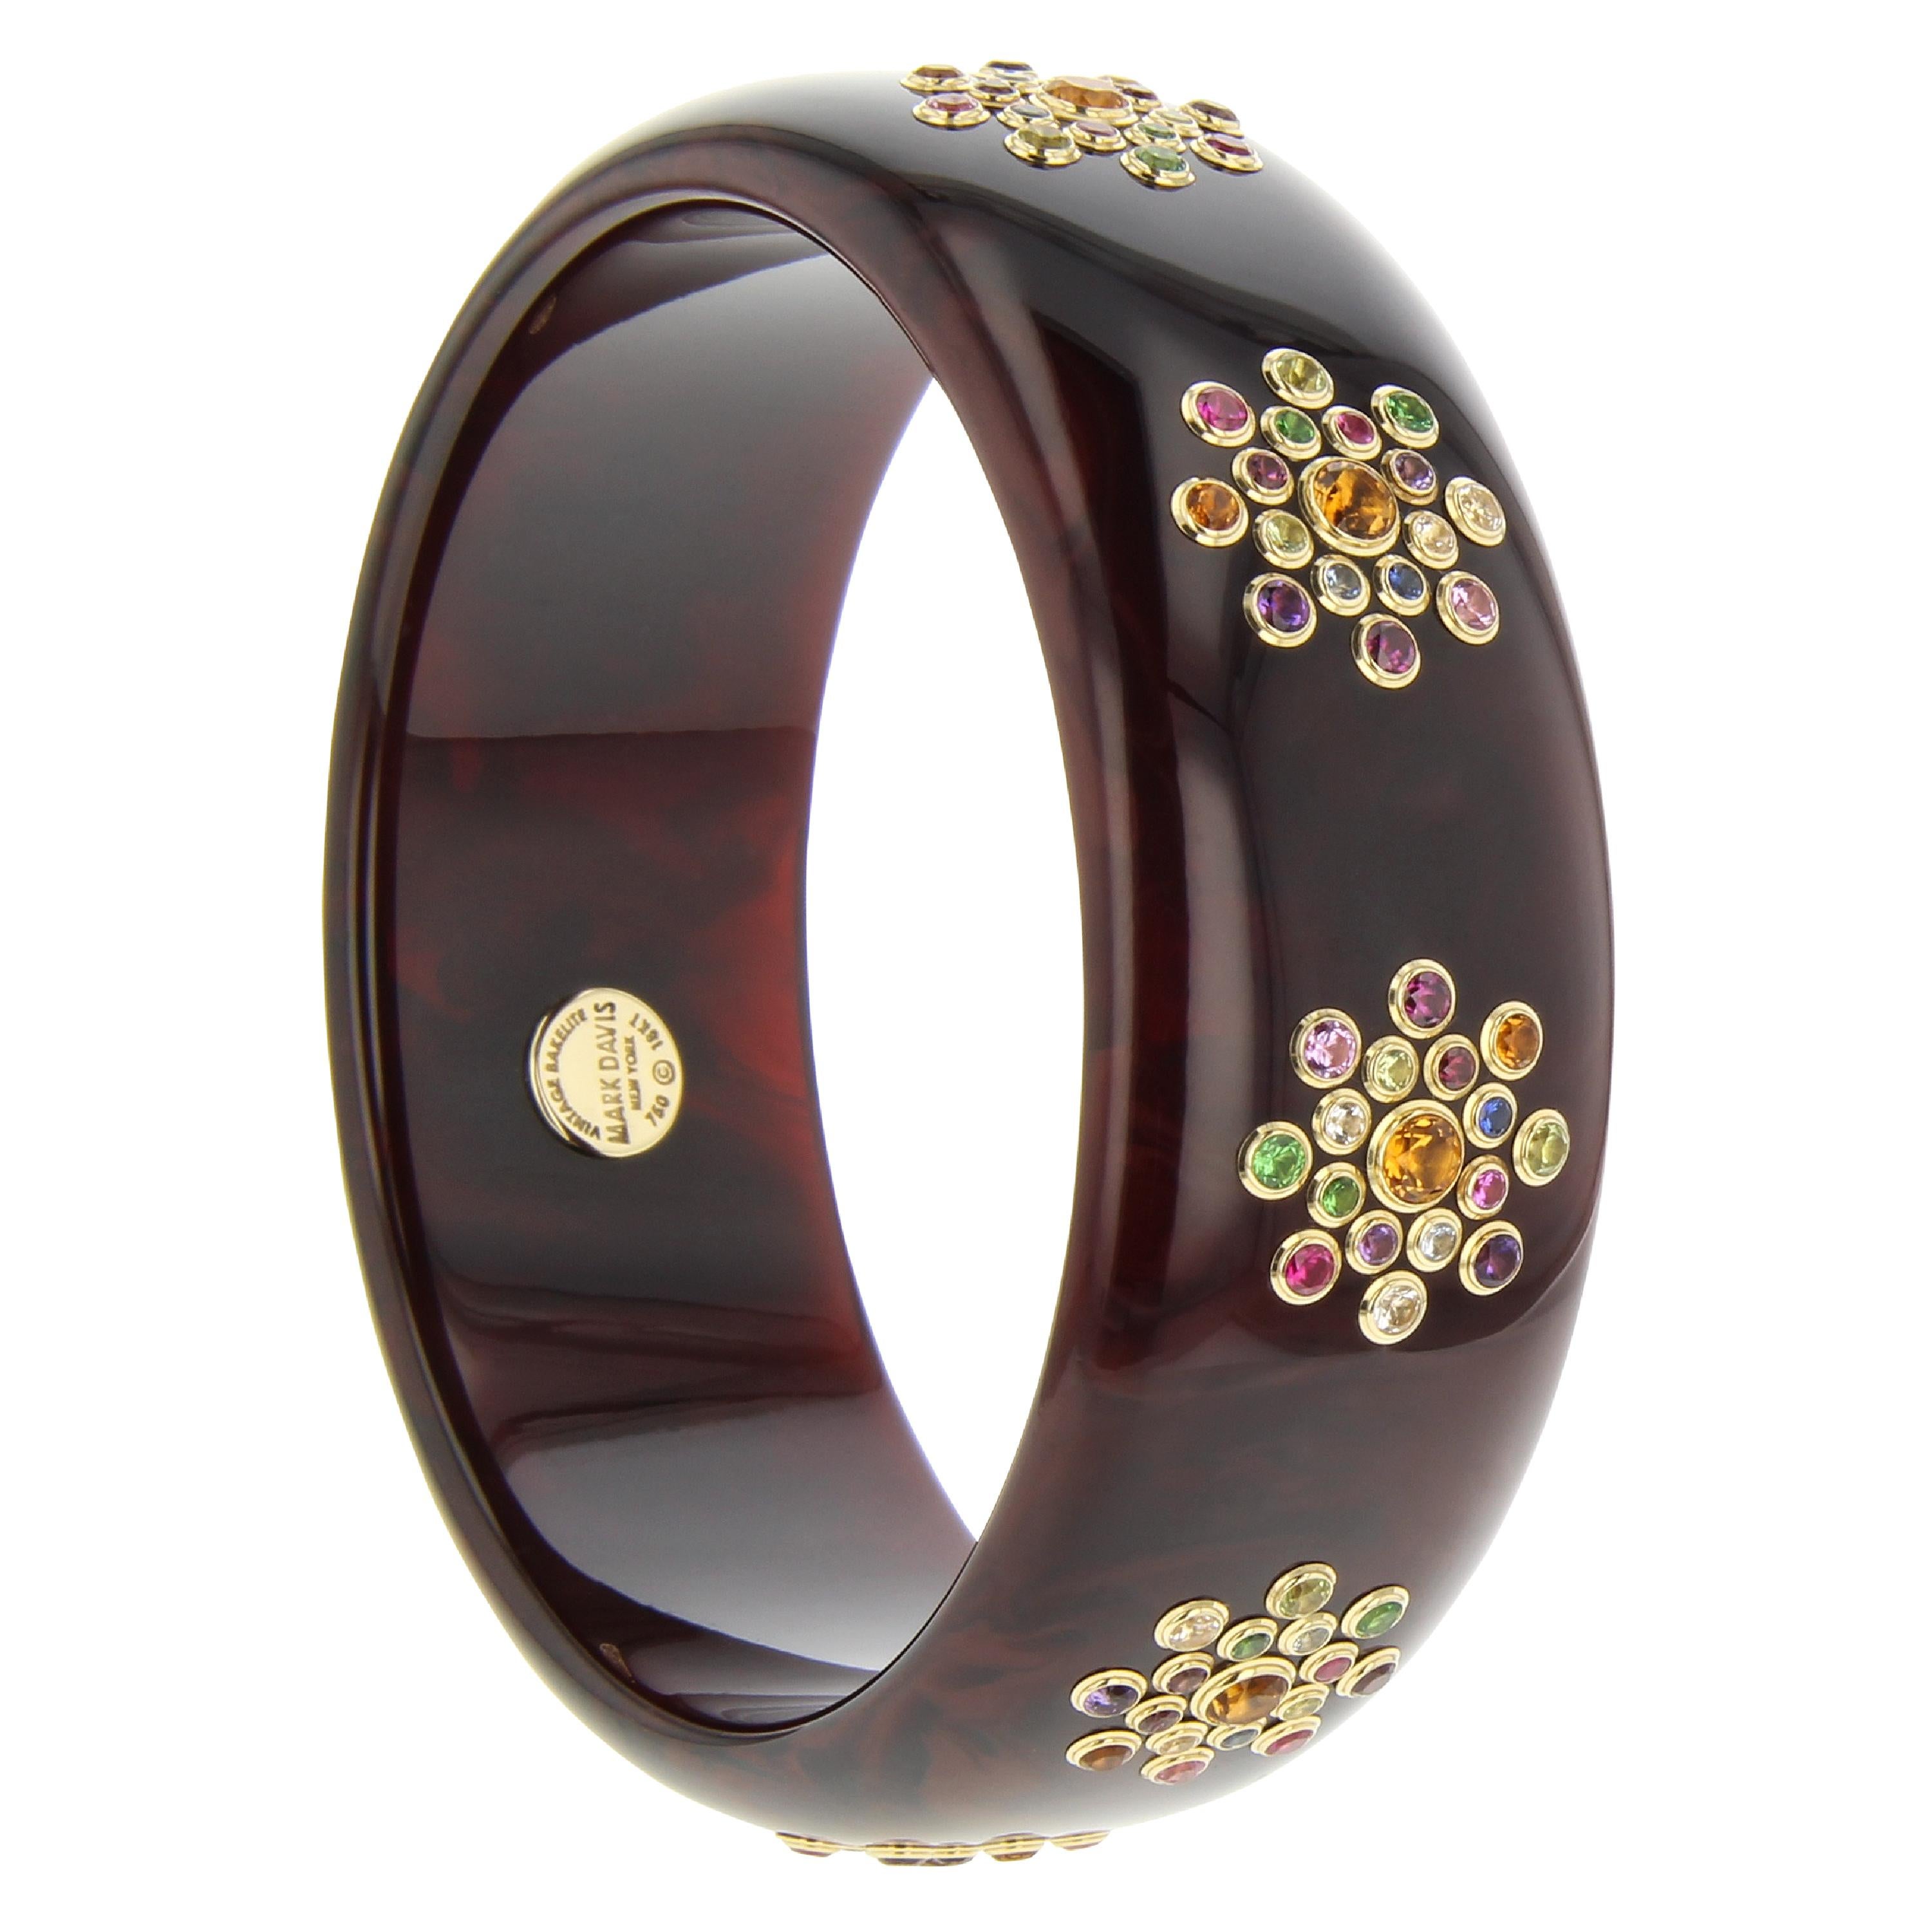 This elegant Mark Davis bangle was handcrafted using a rich, deep, marbled, brown, vintage bakelite set with a wide variety of fine gemstones in 18k yellow gold bezels.

Full details below:
• From the Mark Davis Bakelite line
• Vintage brown